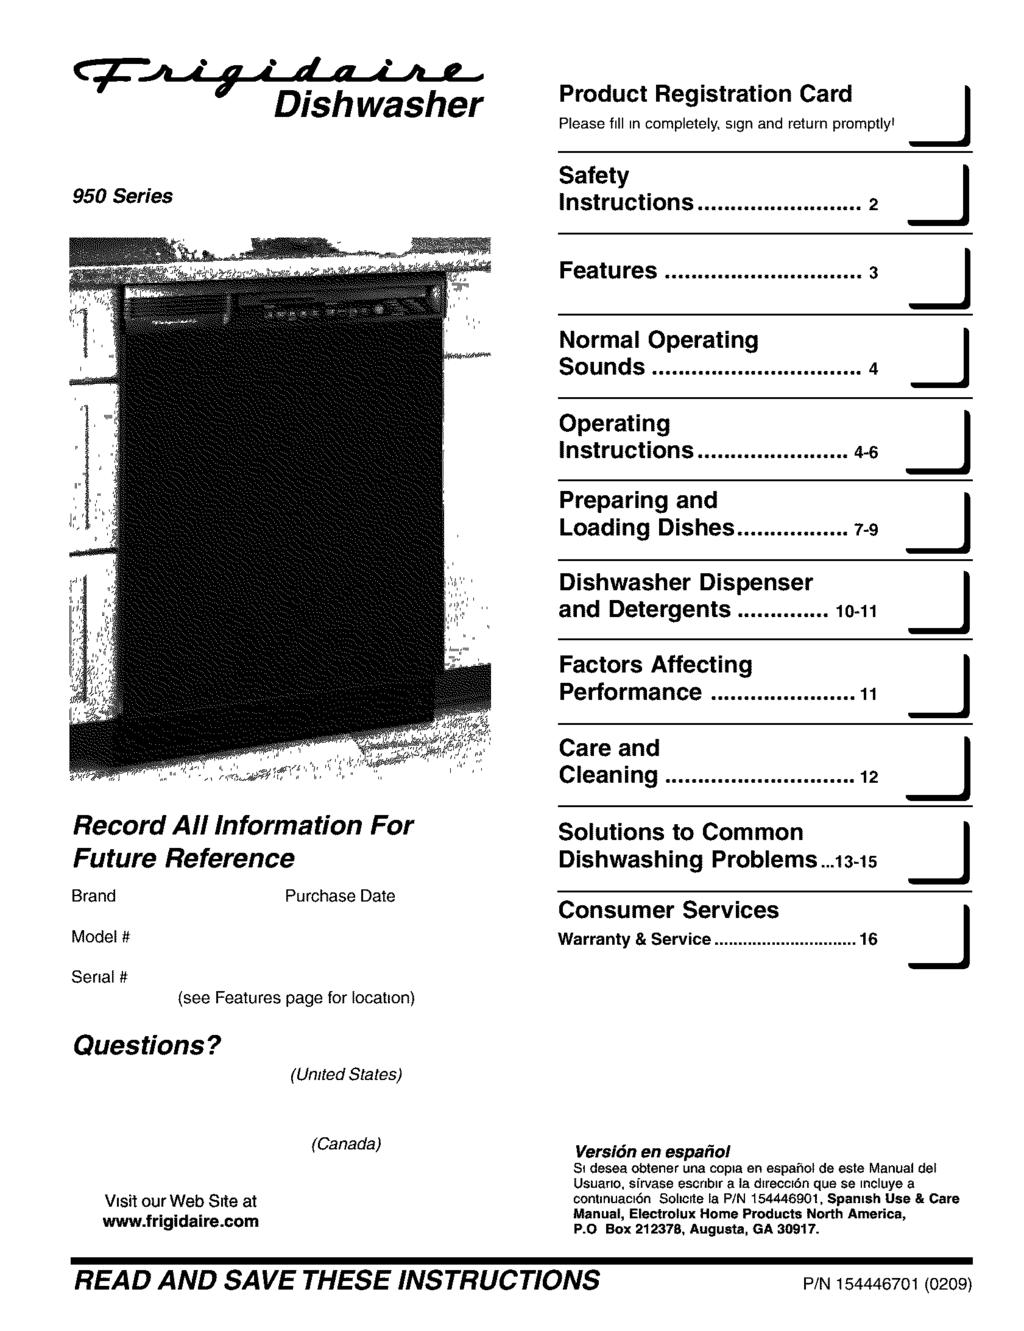 Dishwasher Product Registration Card Please fill in completely, sign and return promptly t J I 950 Series Safety Instructions... 2 _J Features... 3 1 i Sounds Normal Operating.